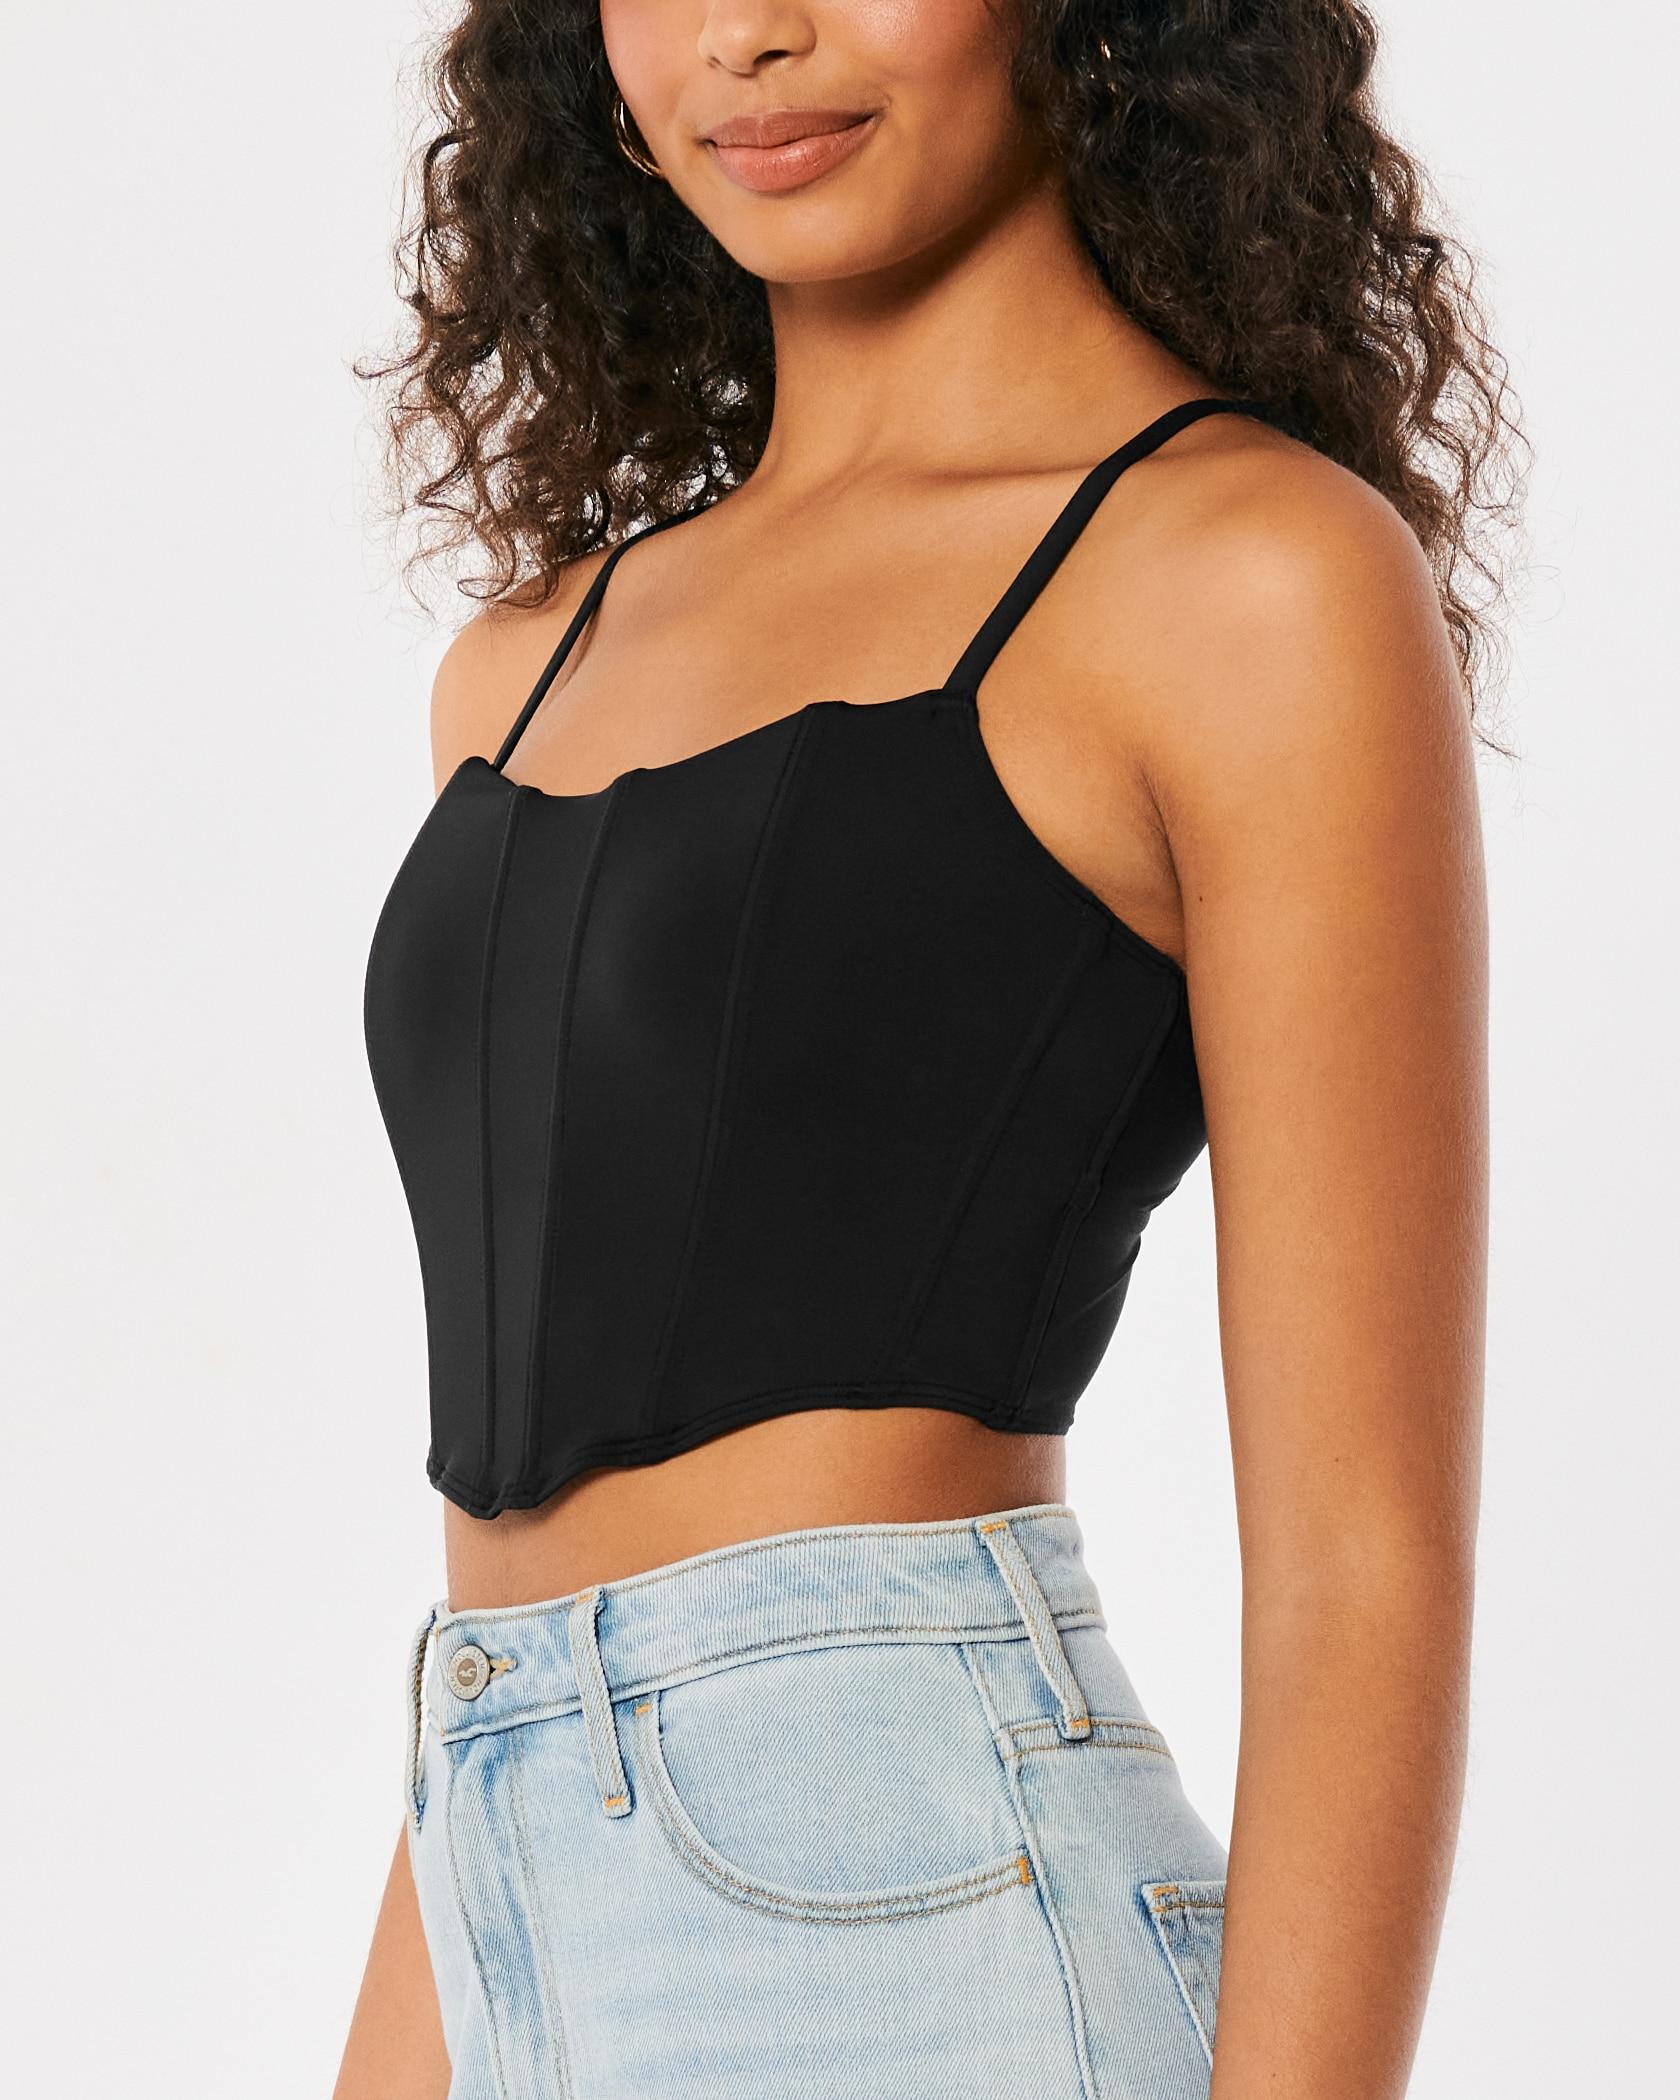 Hollister Gilly Hicks Micro Corset Bra Top in Black | Lyst UK